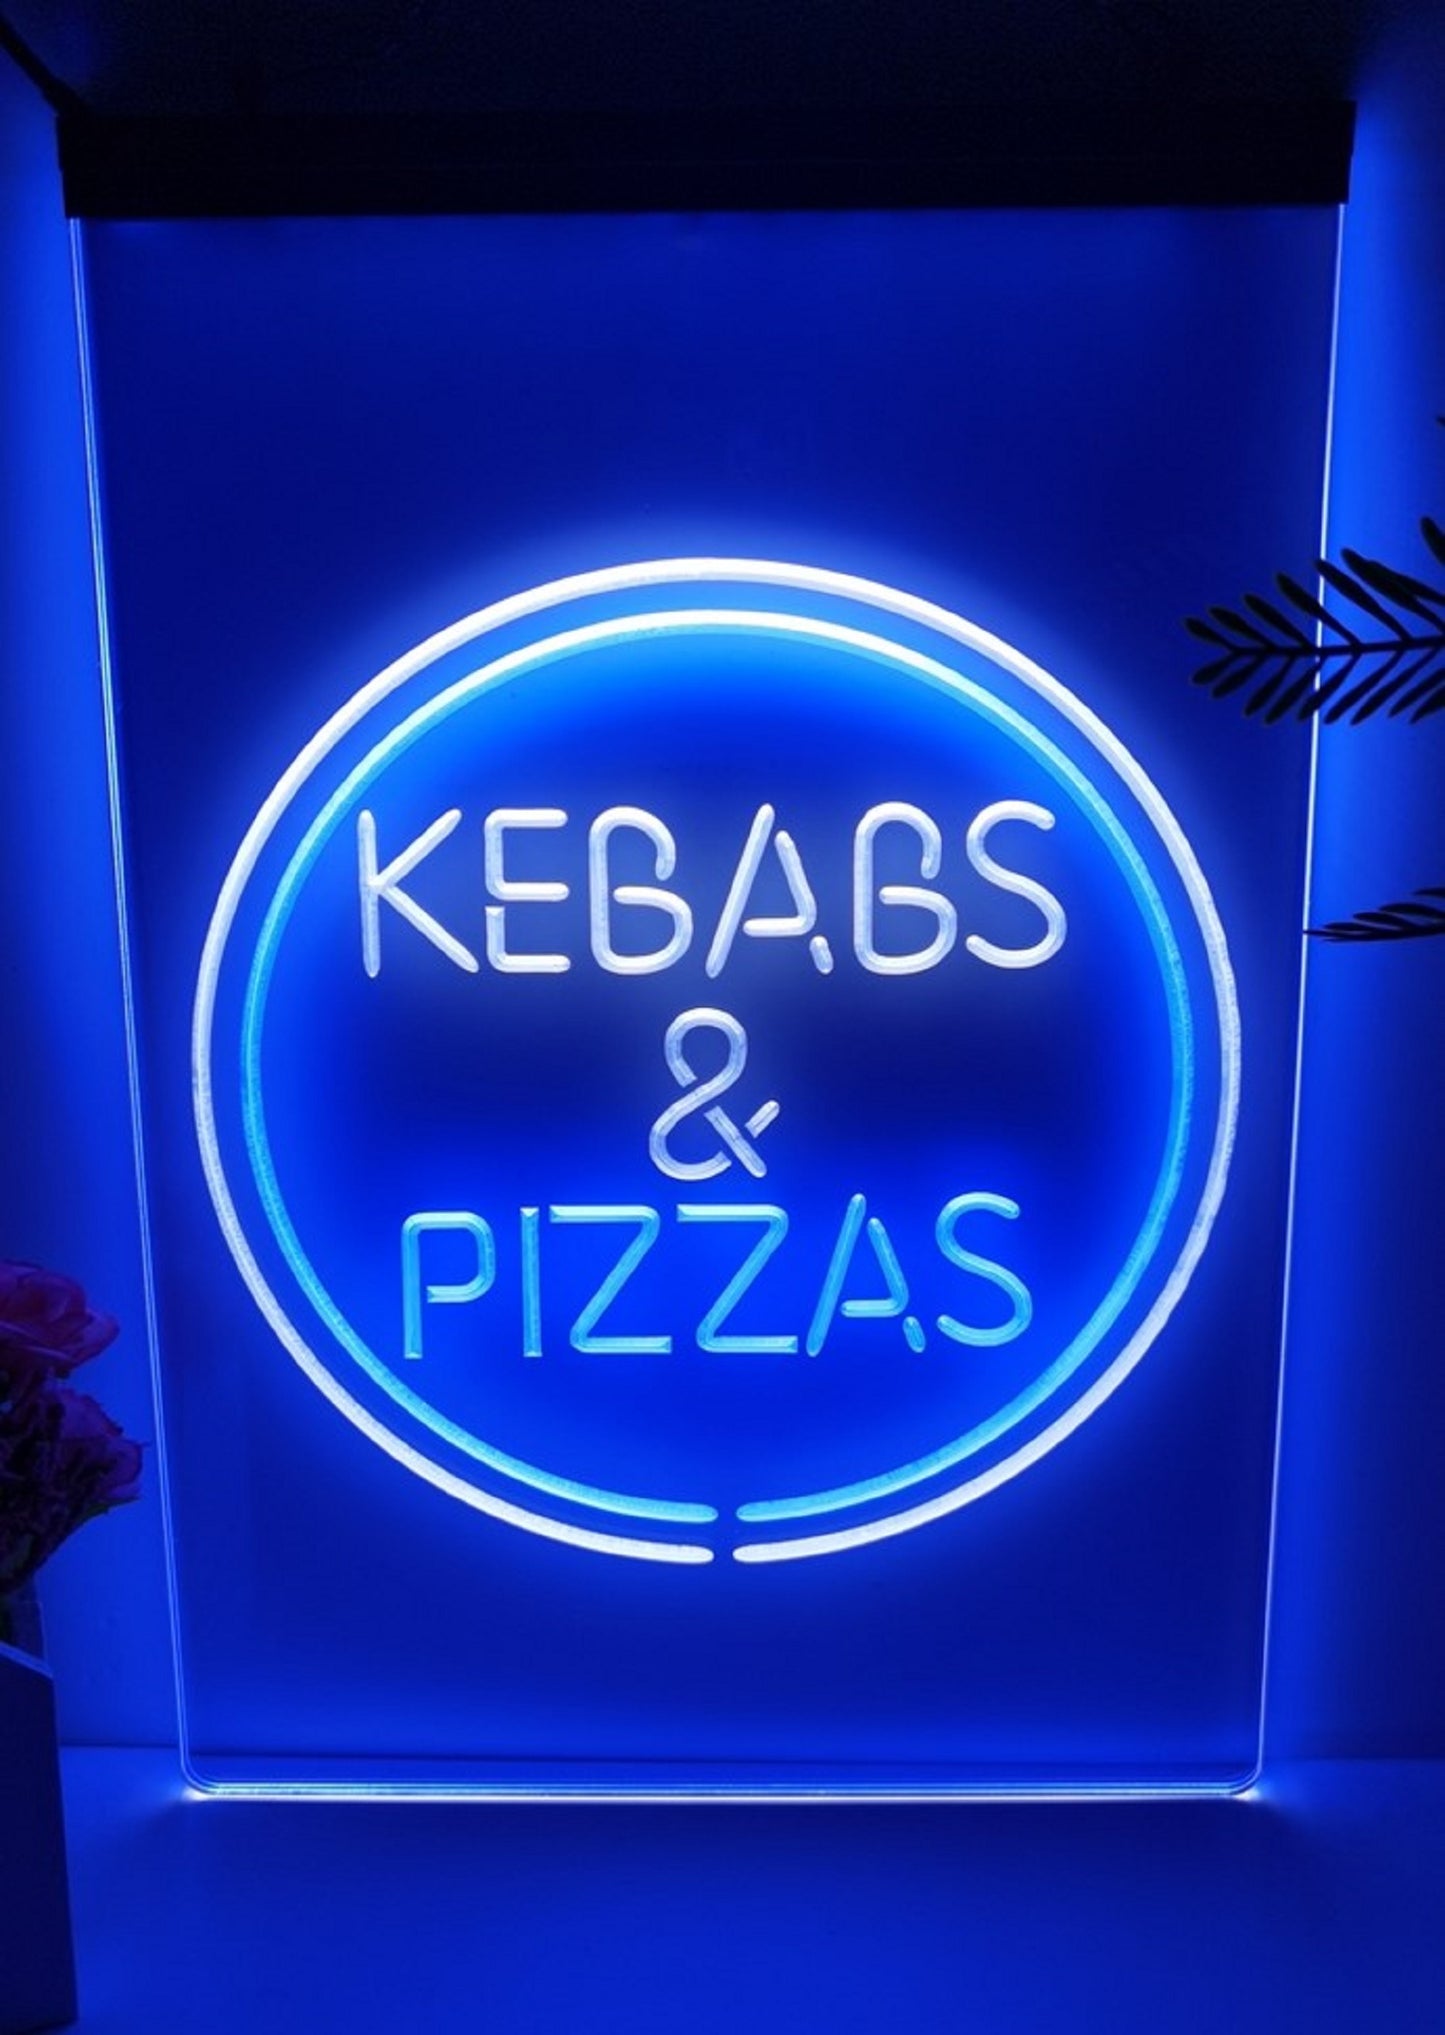 Neon Sign Dual Color Kebabs & Pizzas Fast Food Kebab Pizza Restaurant Decor